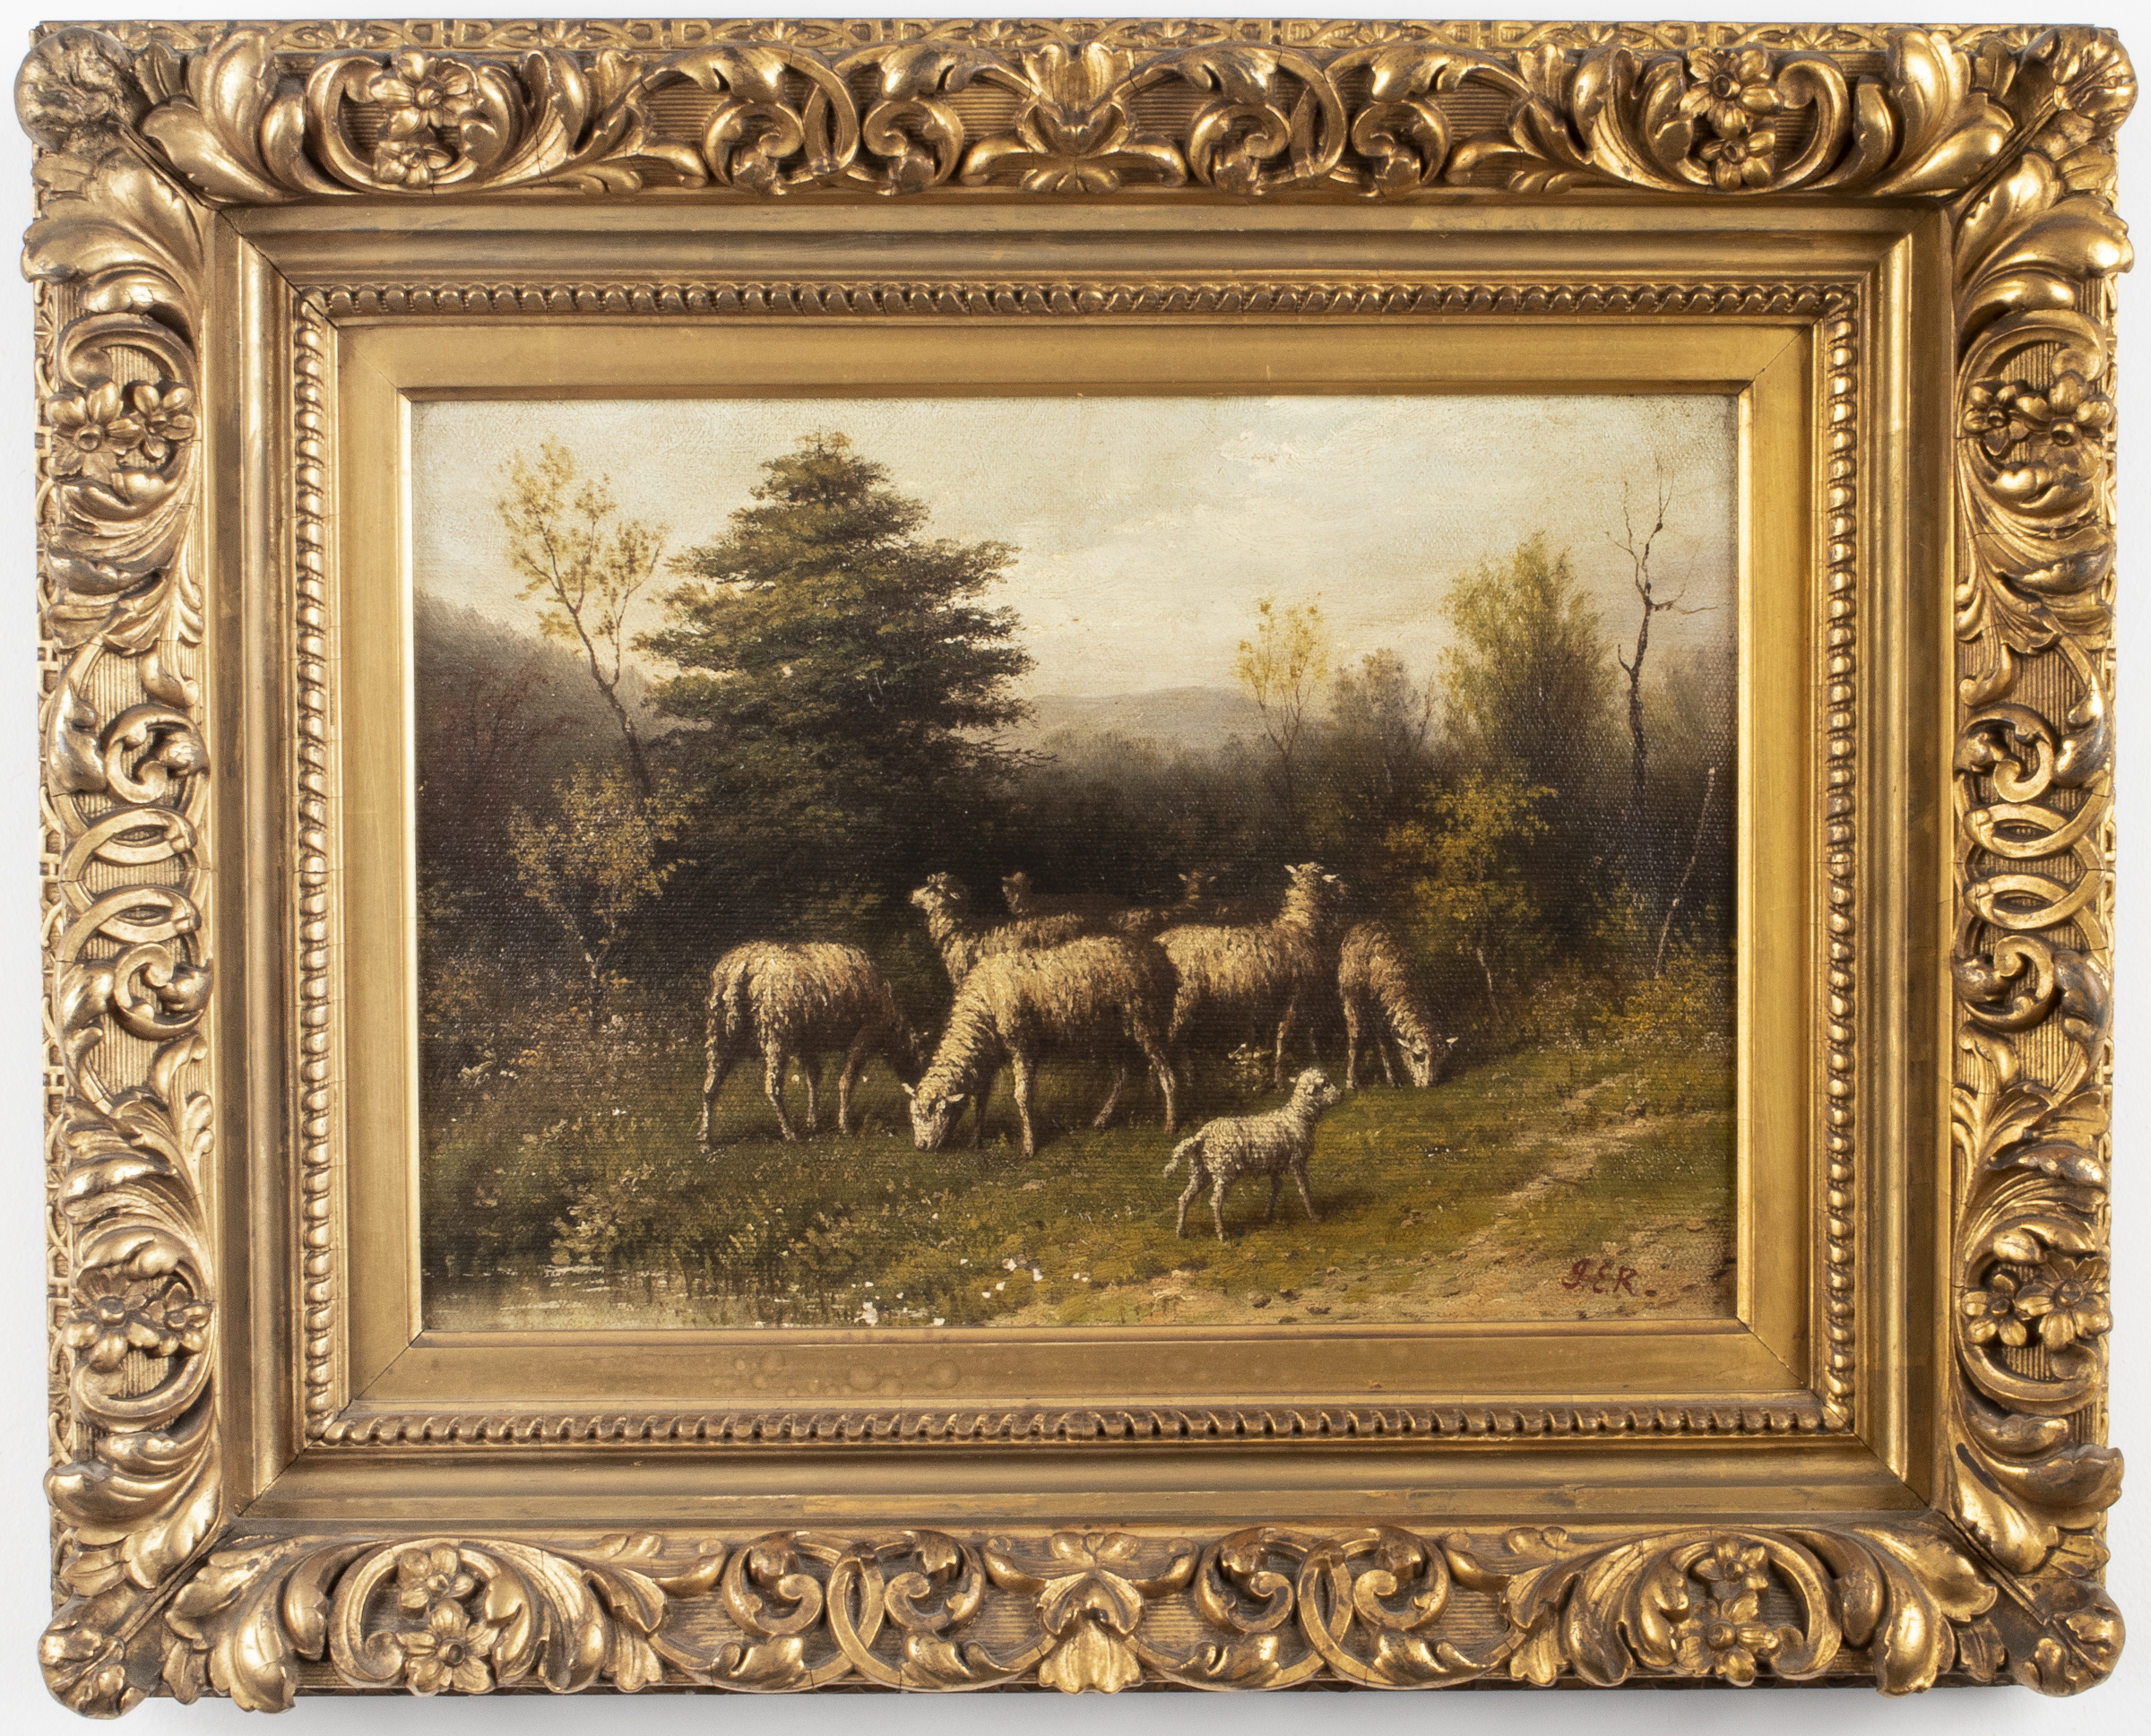 ILLEGIBLY SIGNED "PASTORAL WITH